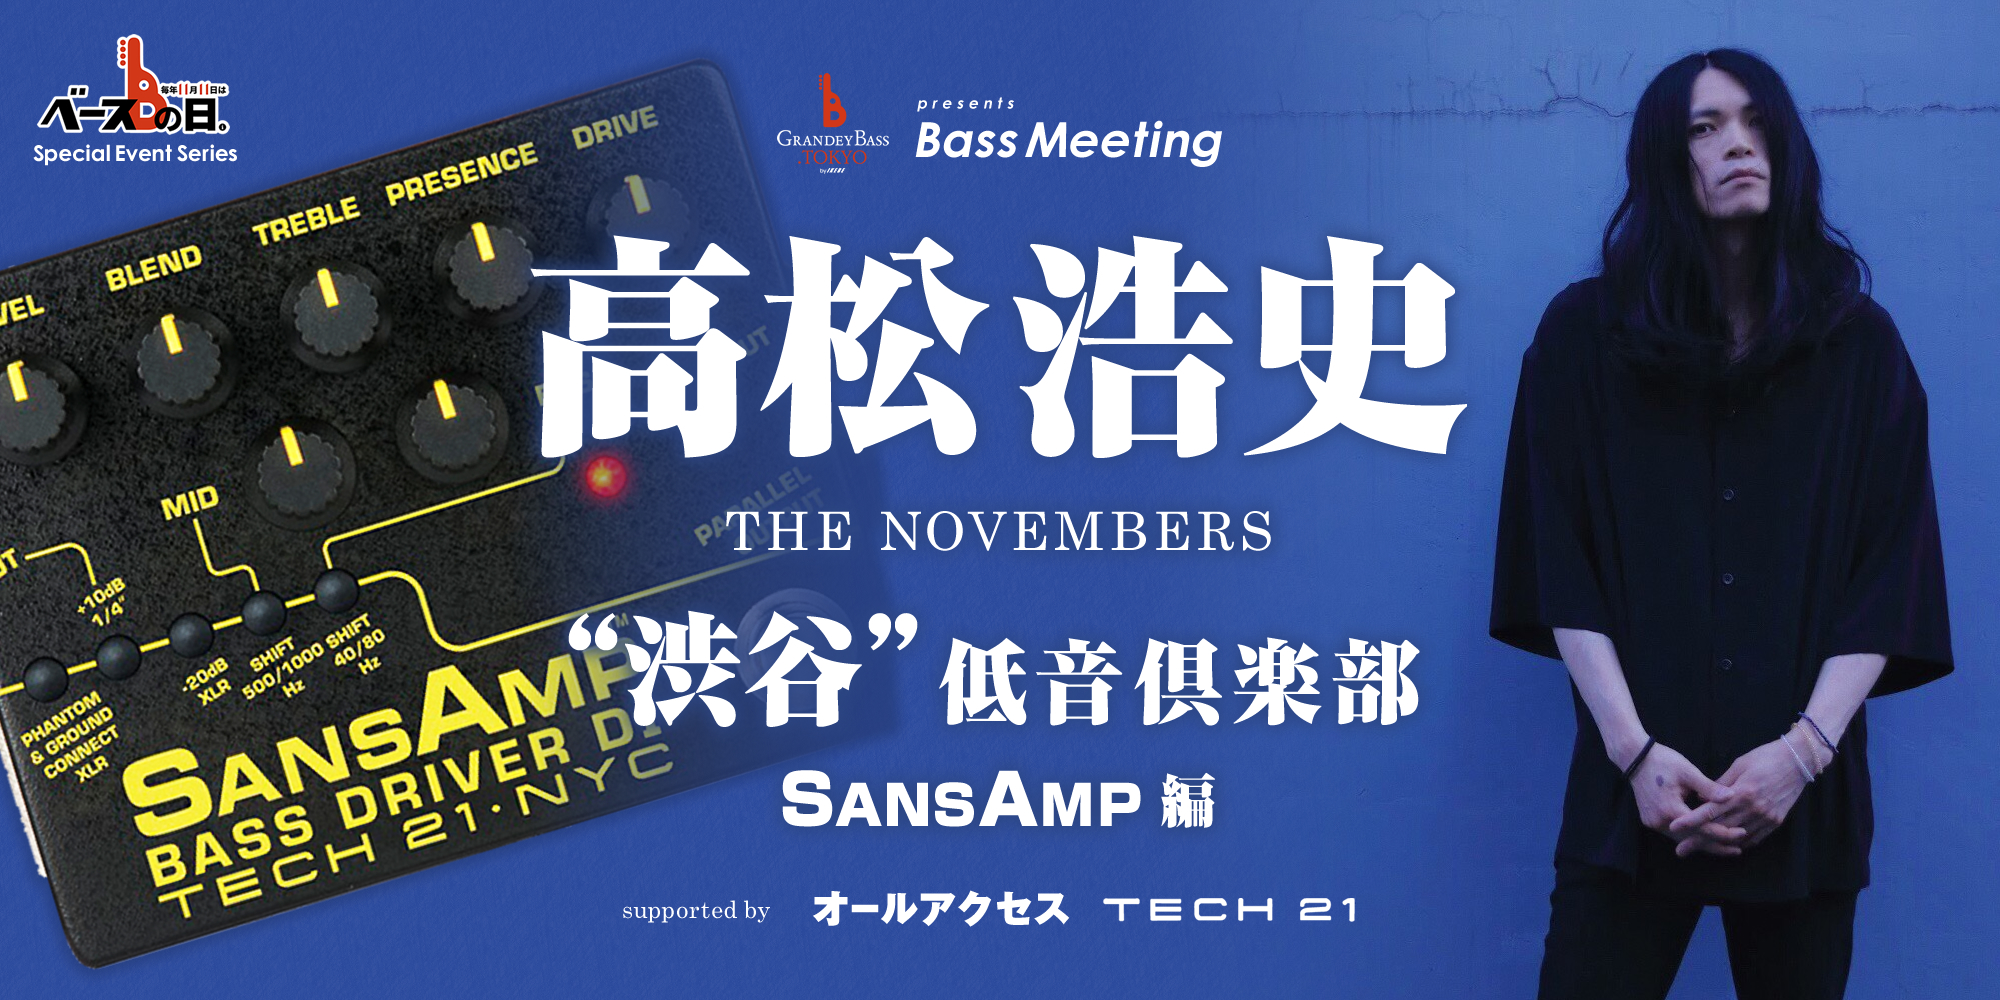 【IKEBE ベースの日 Special Event Series GRANDEY BASS TOKYO Presents Bass Meeting『高松浩史（THE NOVEMBERS）“渋谷”低音倶楽部 SANSAMP編 supported by All Access / TECH21』】